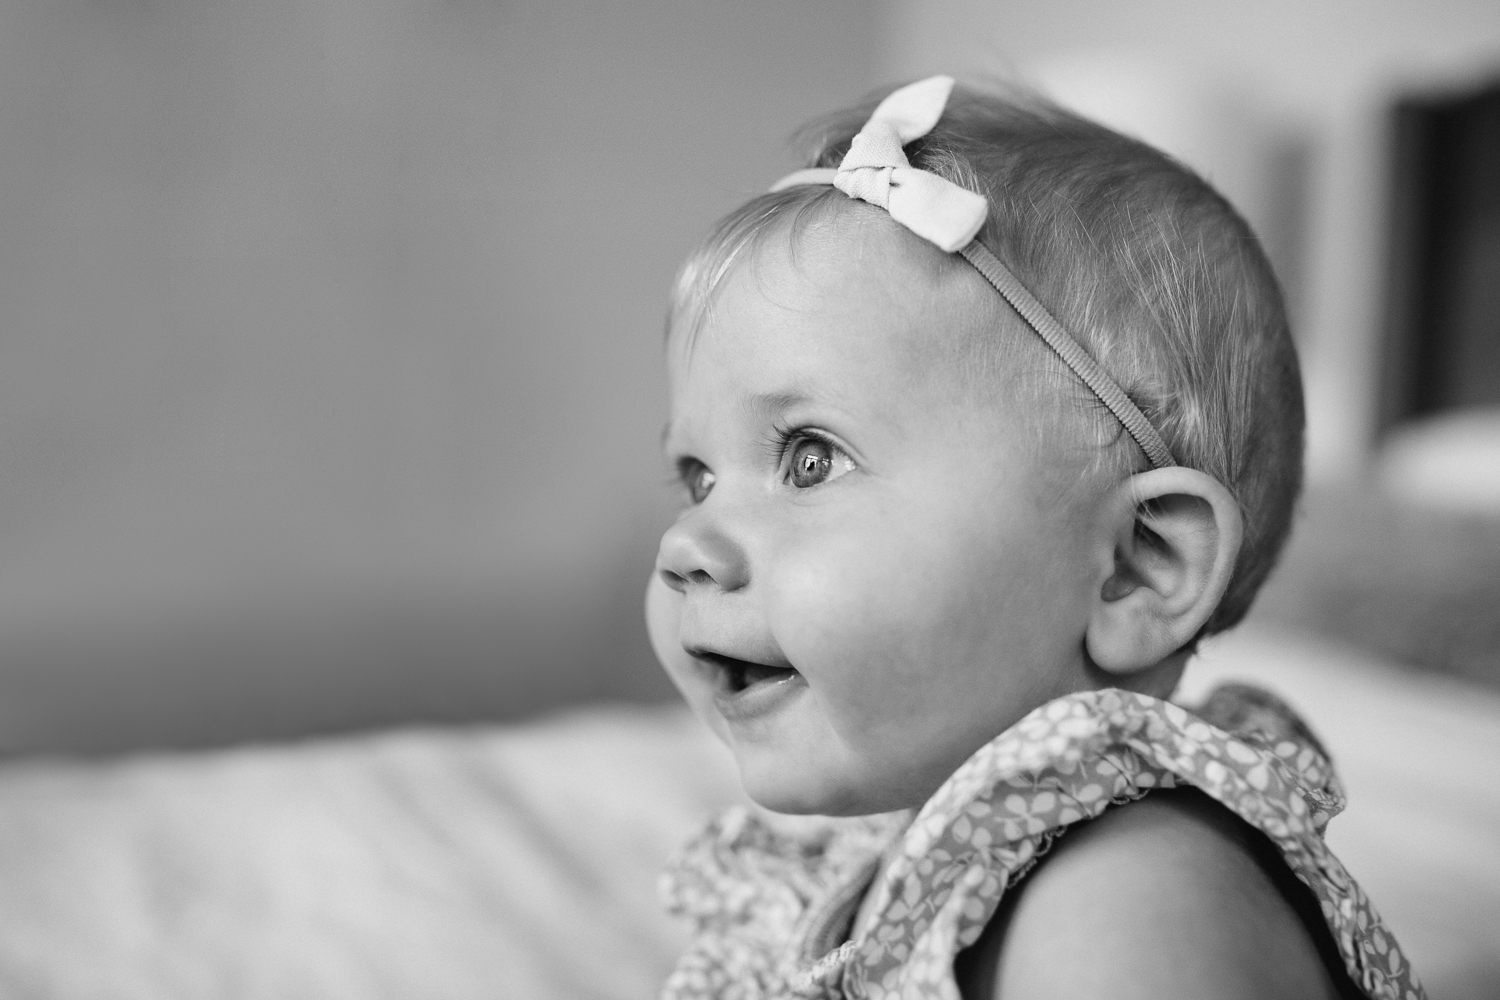 6 month old baby girl with blonde hair and blue eyes sitting on bed - Newmarket In-home Family Photos